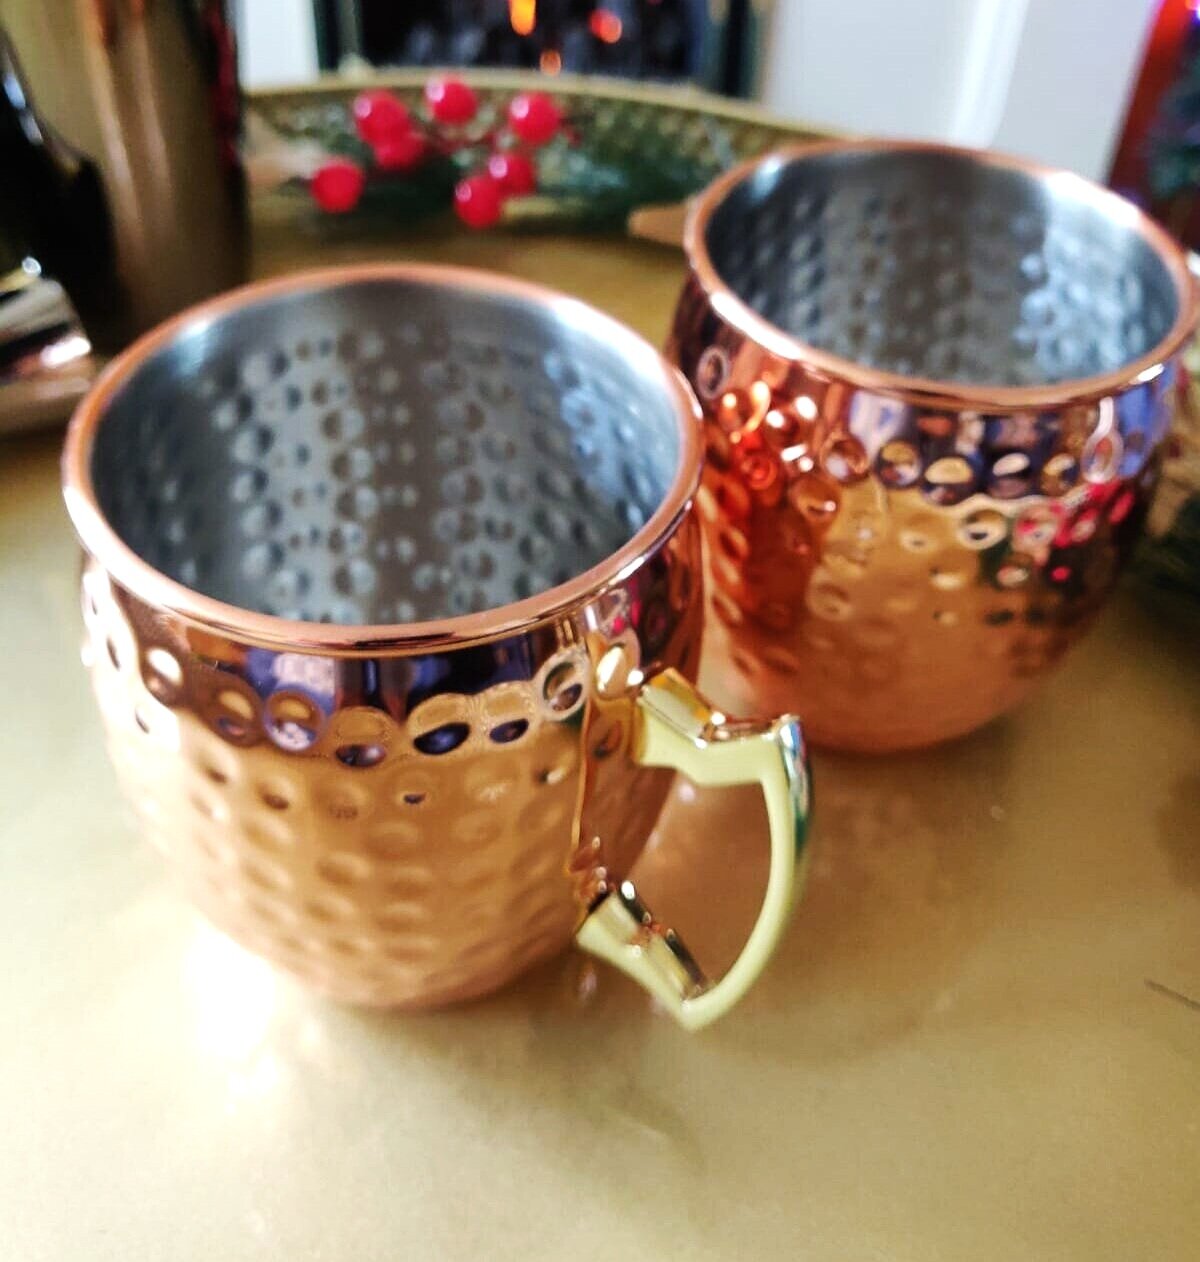 Moscow mules